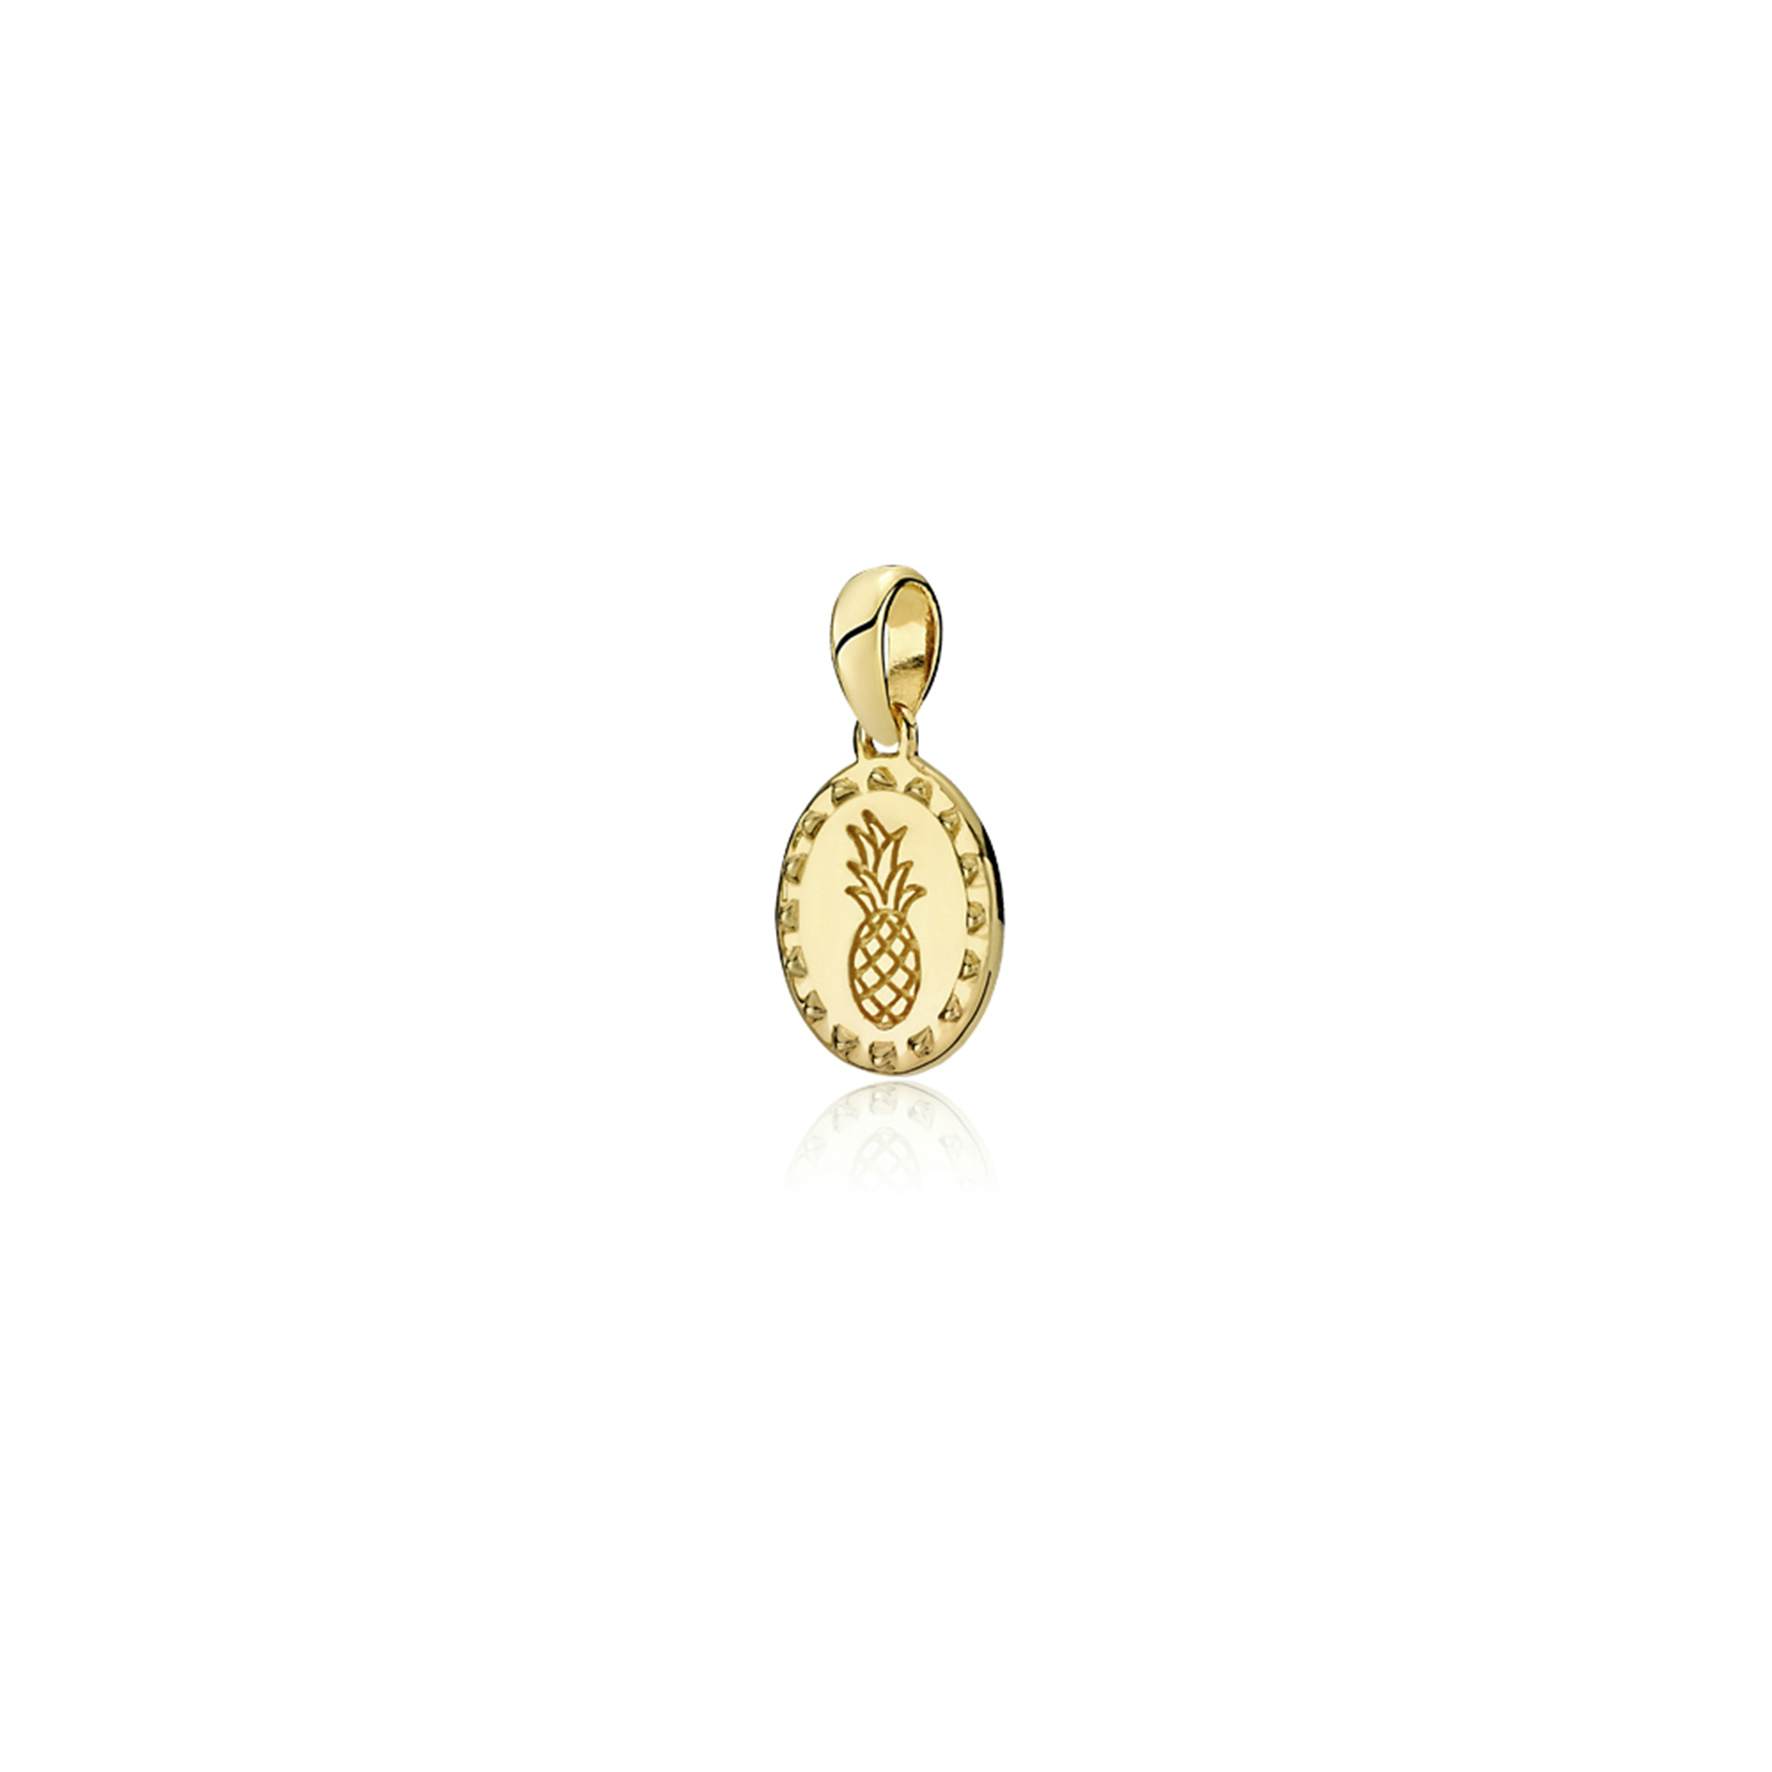 Anna By Sistie Round Pendant from Sistie in Goldplated-Silver Sterling 925